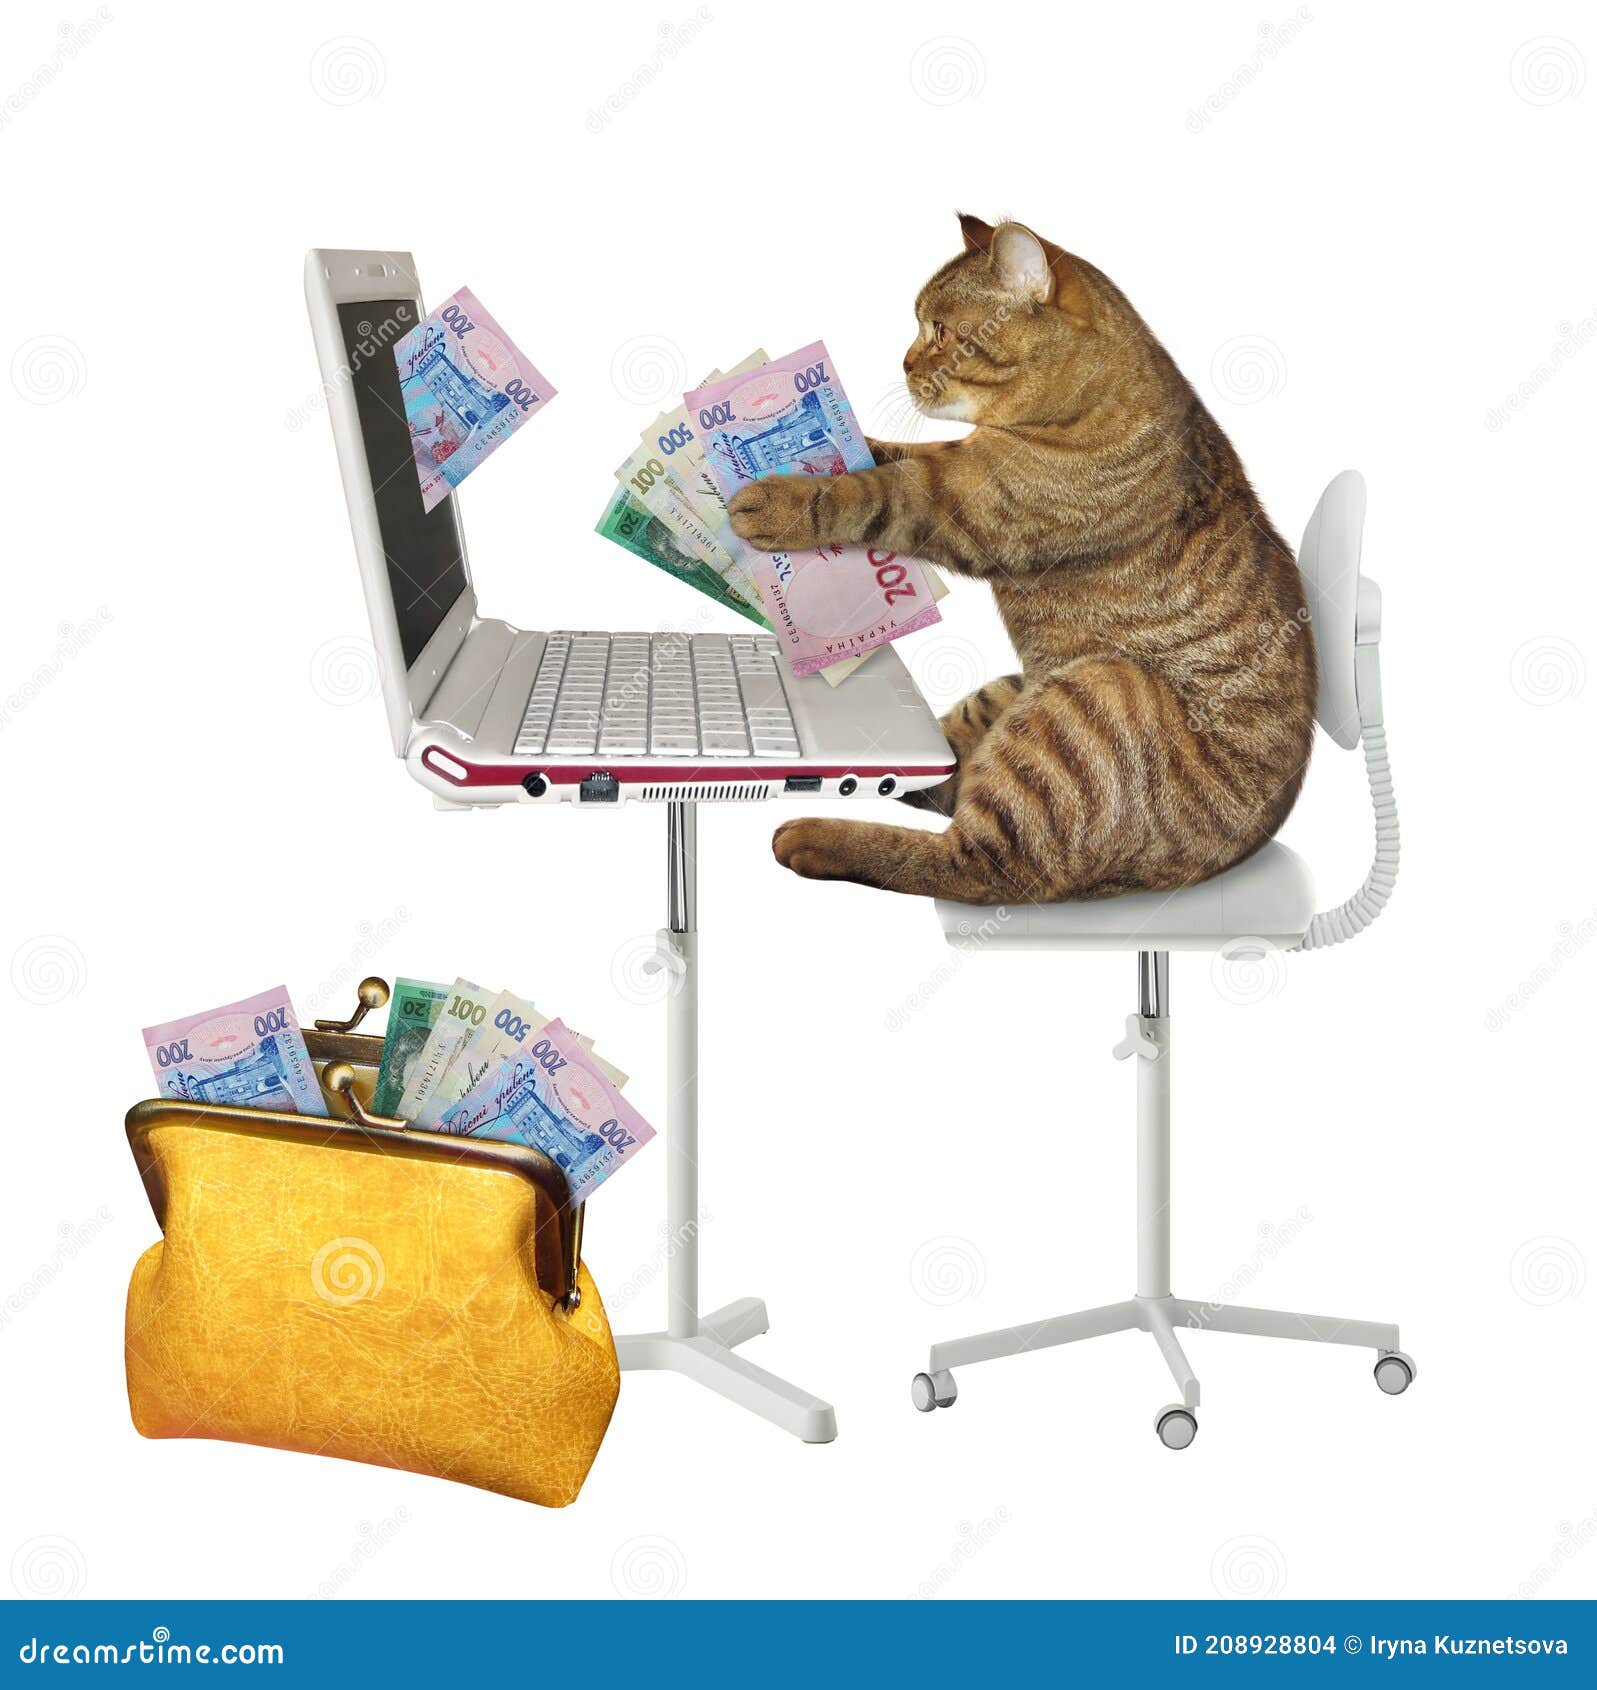 cat earns hryvnia from laptop